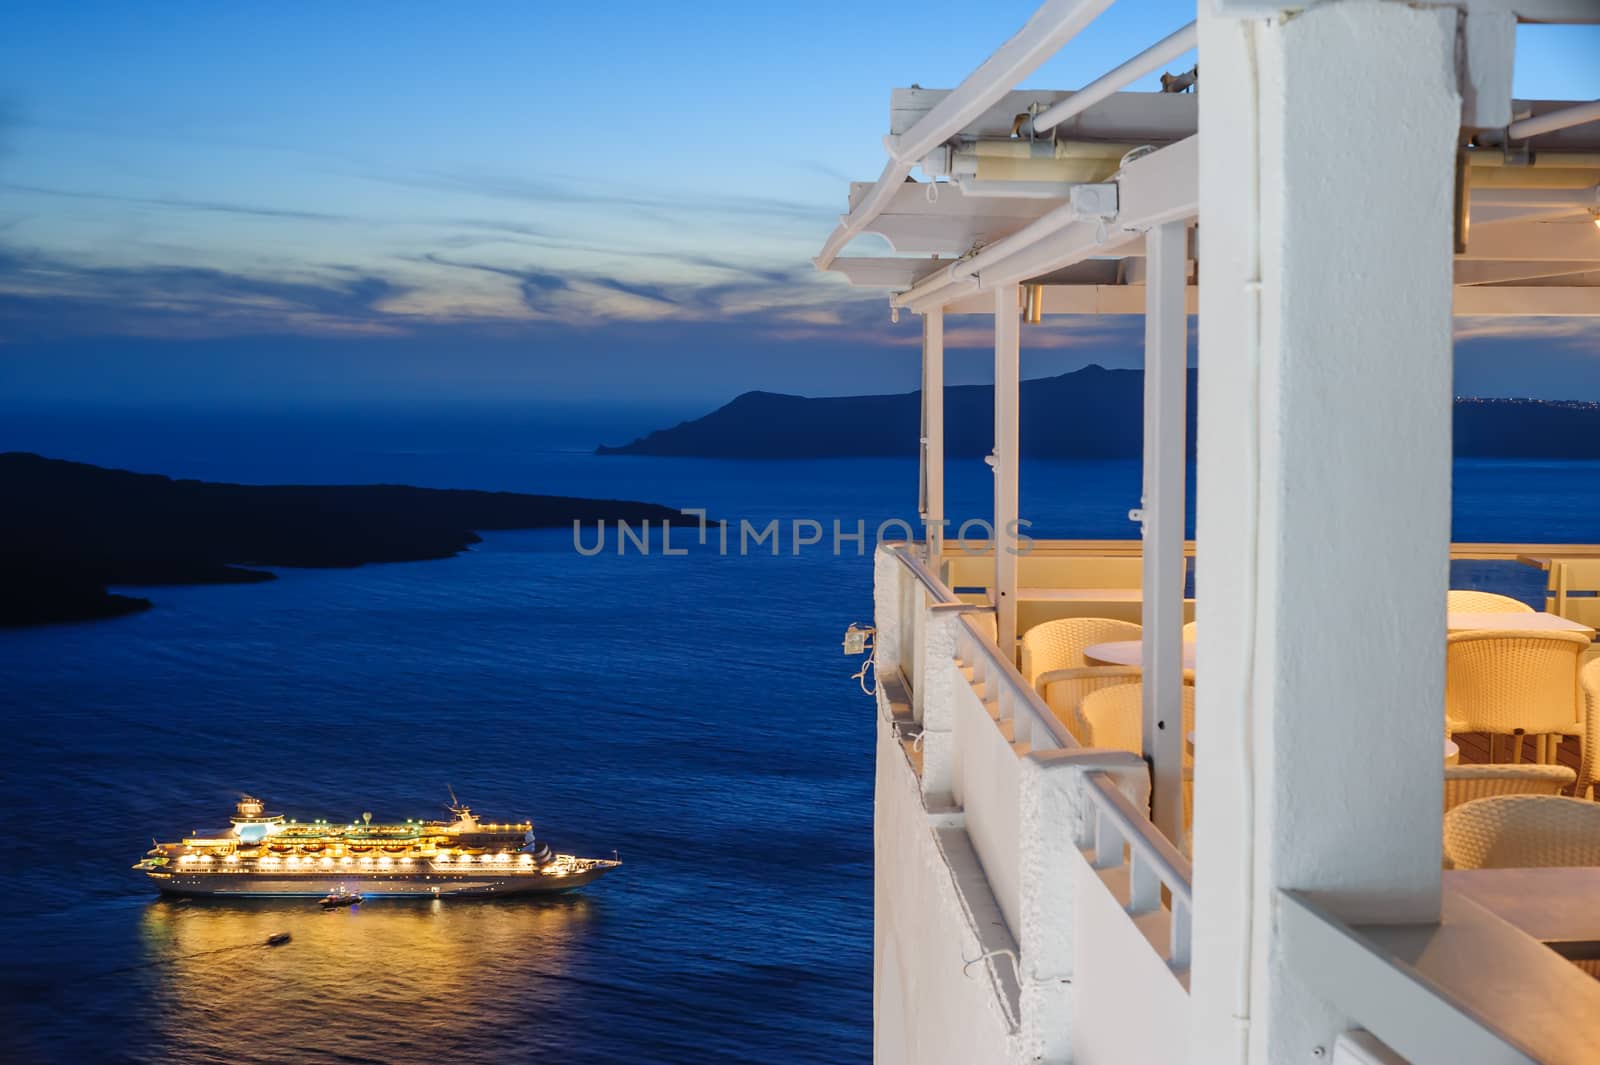 Enlighted cruise ship after sunset near Fira town at Santorini island, Greece by starush